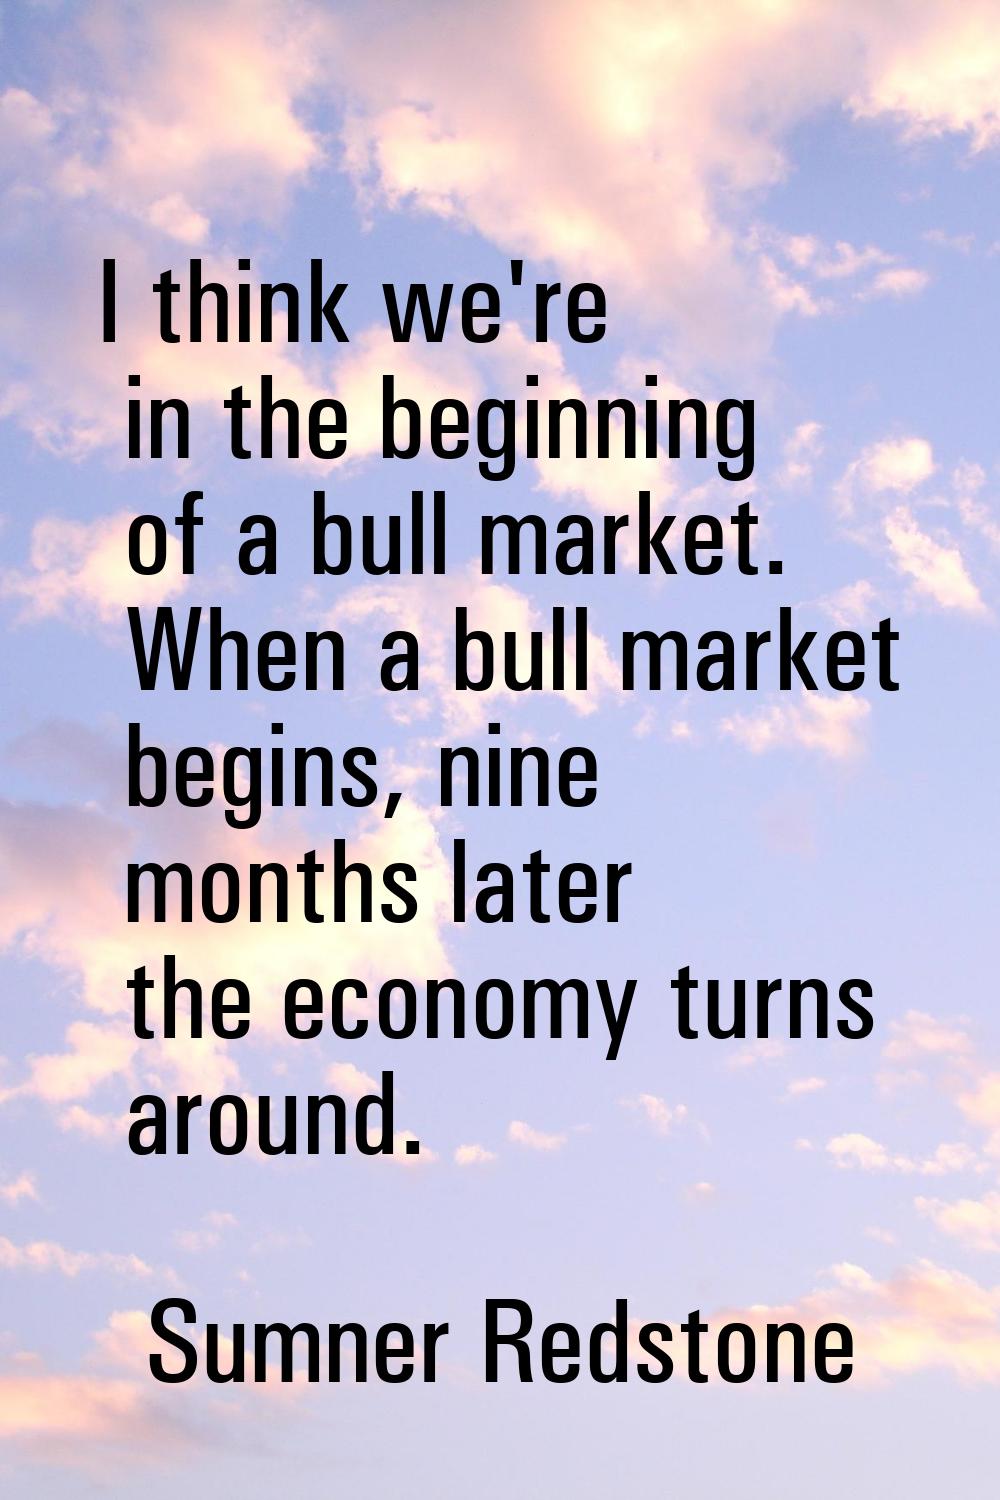 I think we're in the beginning of a bull market. When a bull market begins, nine months later the e